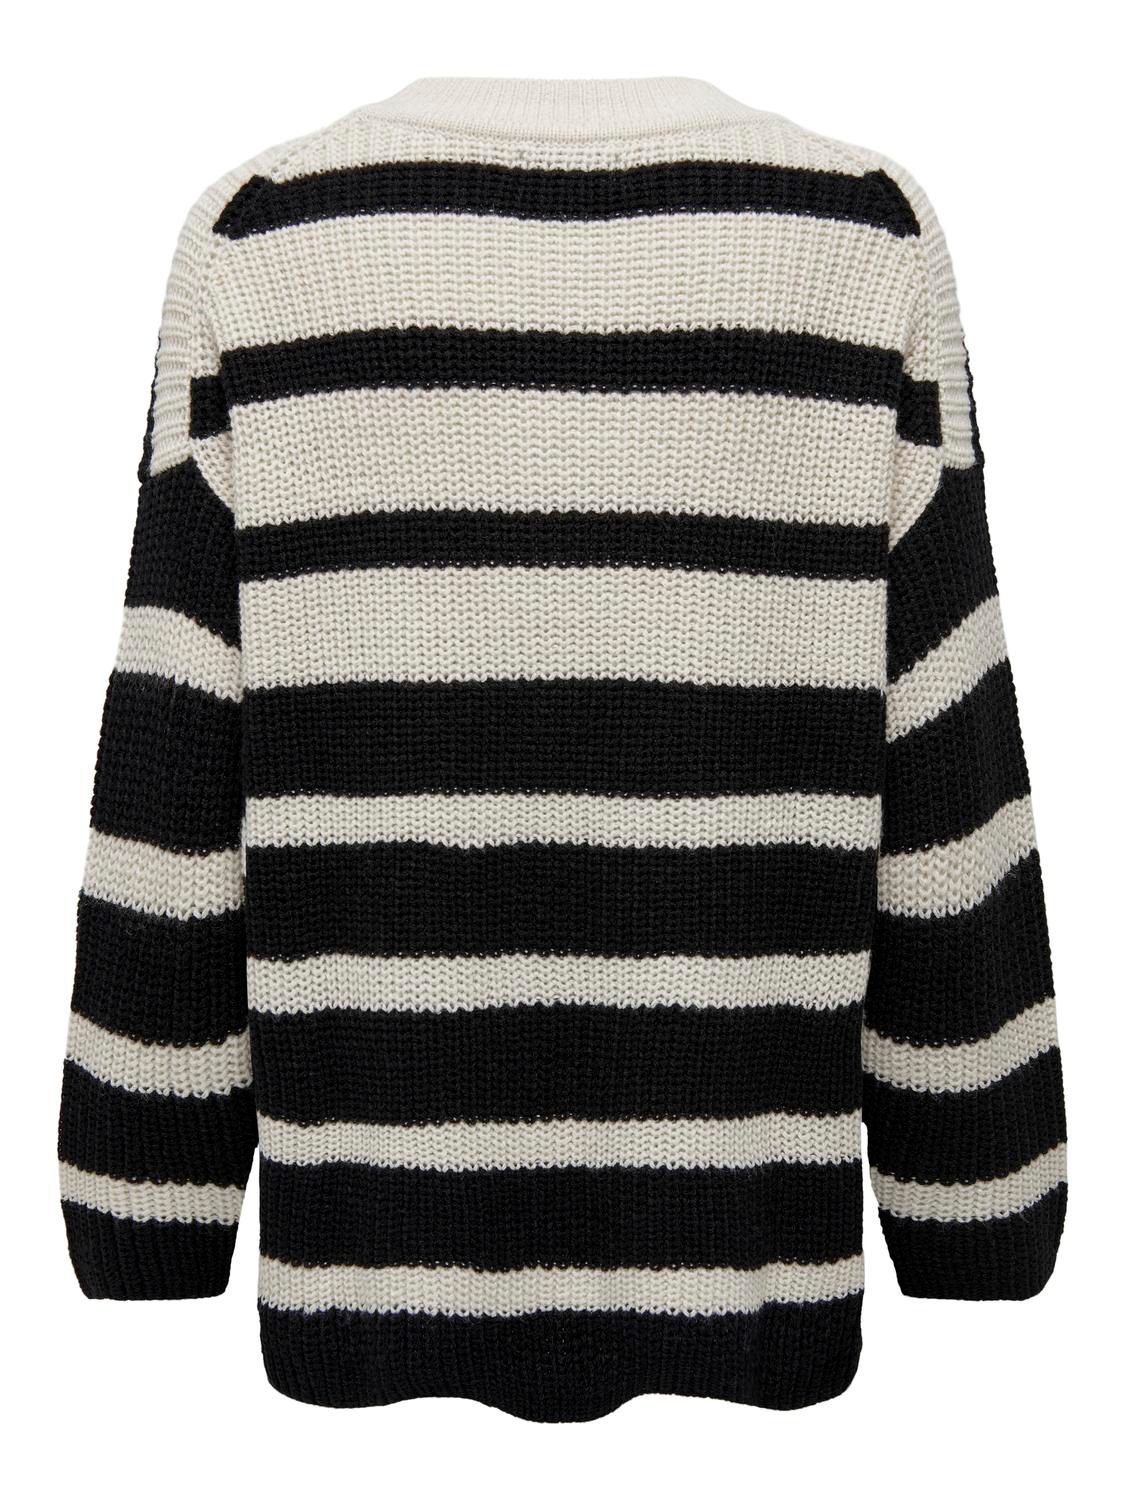 ONLY Striped Knit Pullover -Eggnog - 15302345